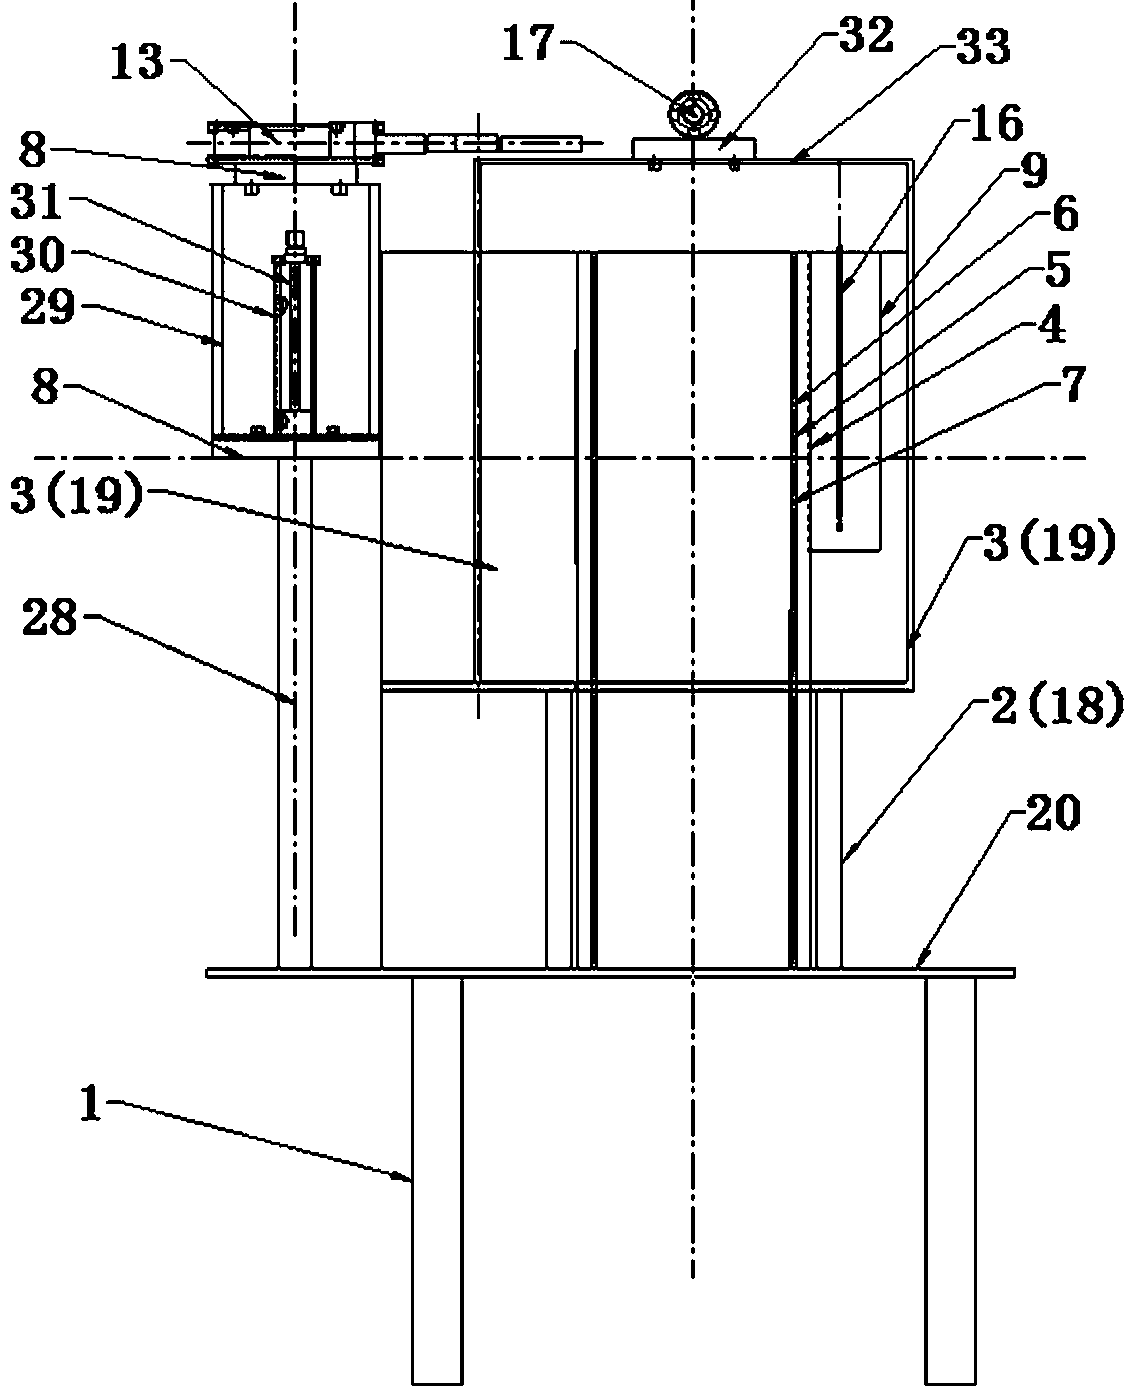 An automatic floating and sinking experimental device with a linear structure